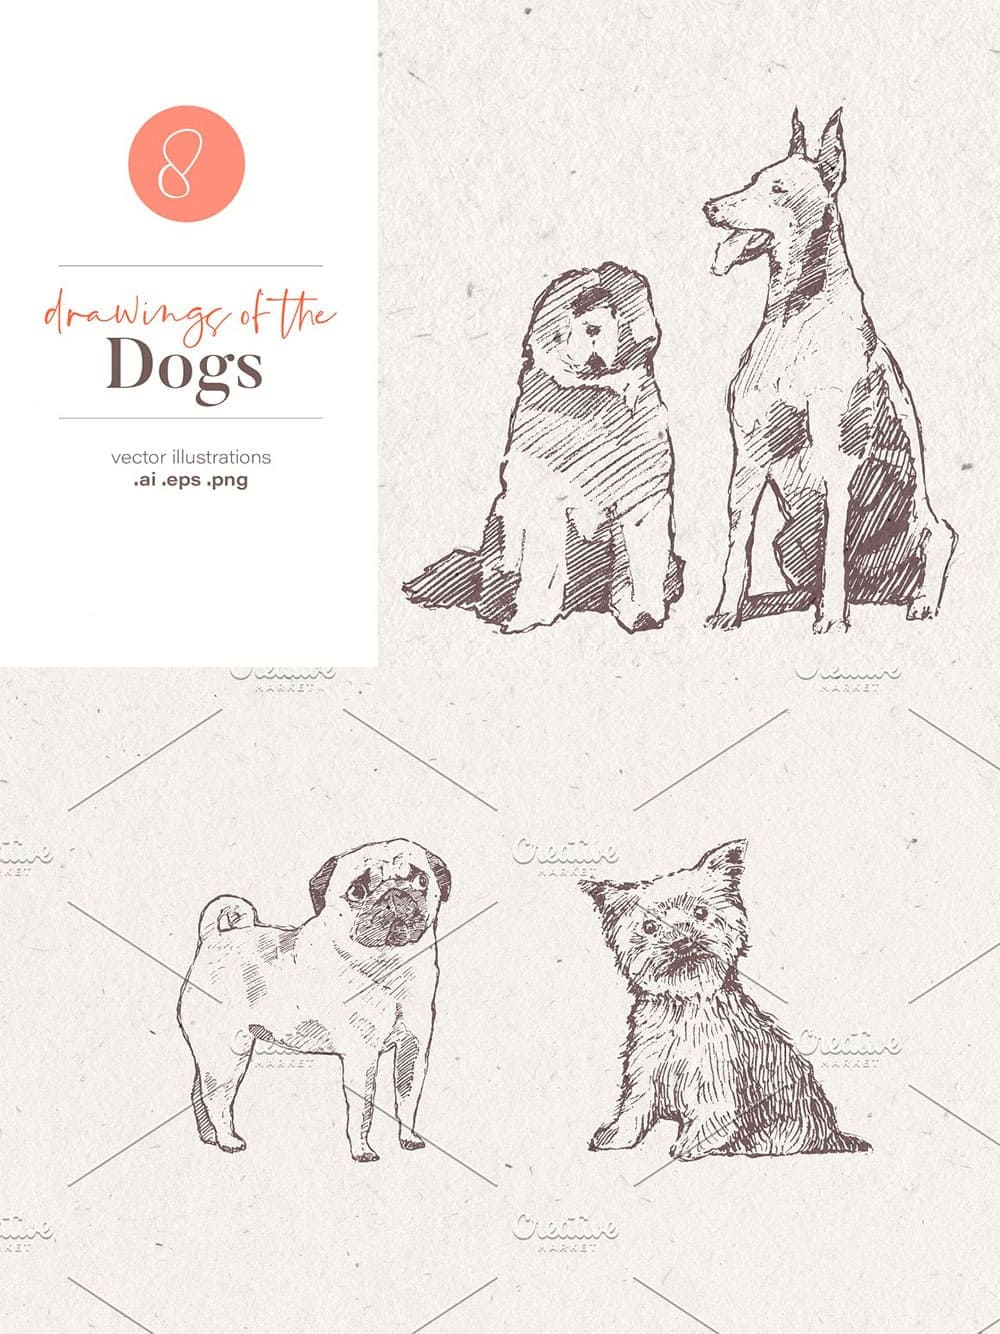 Drawings of the dogs, picture for pinterest.